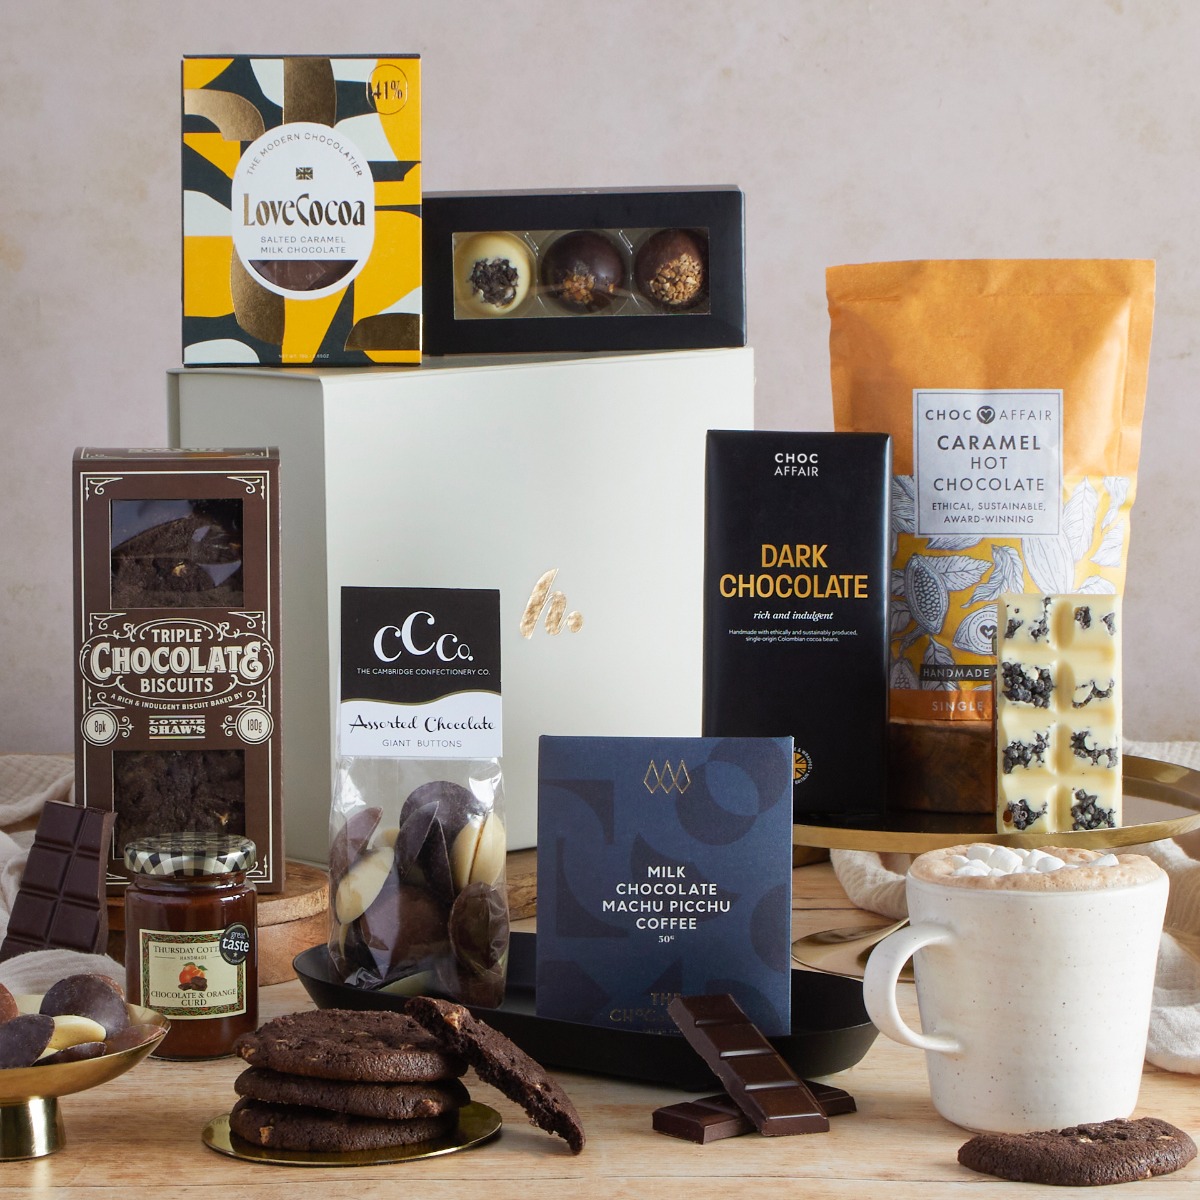 The Chocolate Indulgence Hamper with contents on display as a recommended Easter gift